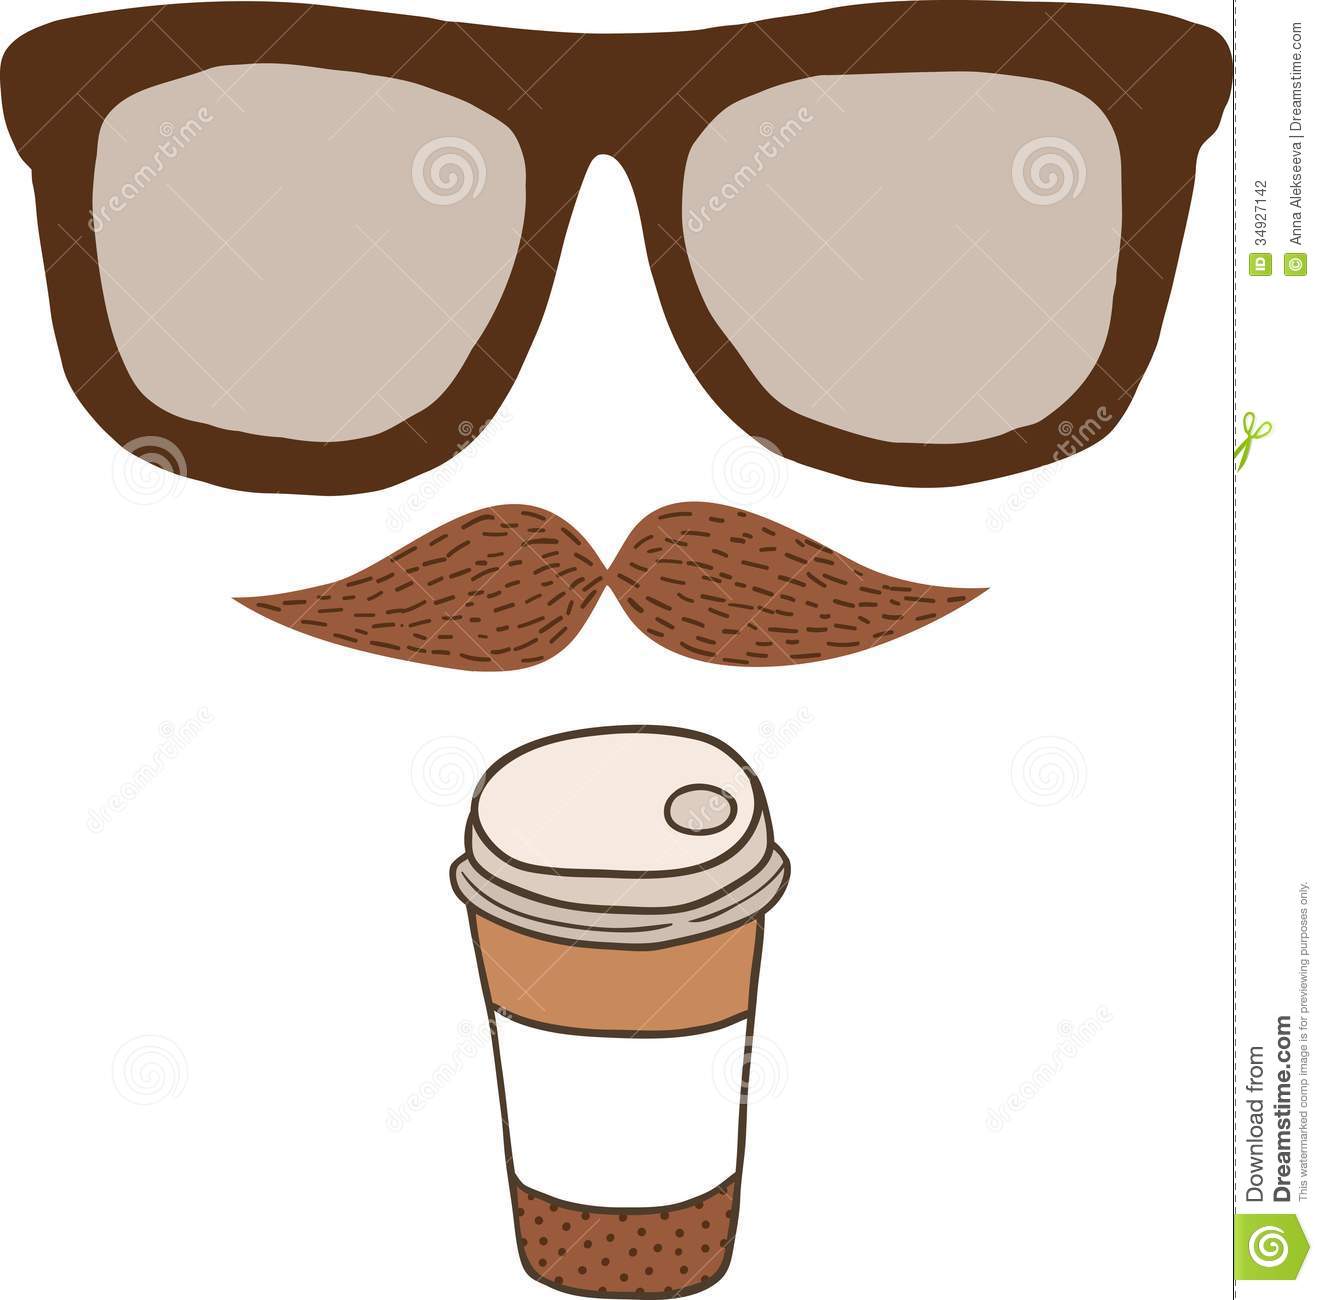 Cute Cartoon Doodle Coffee Cup  Stock Photography   Image  34927142